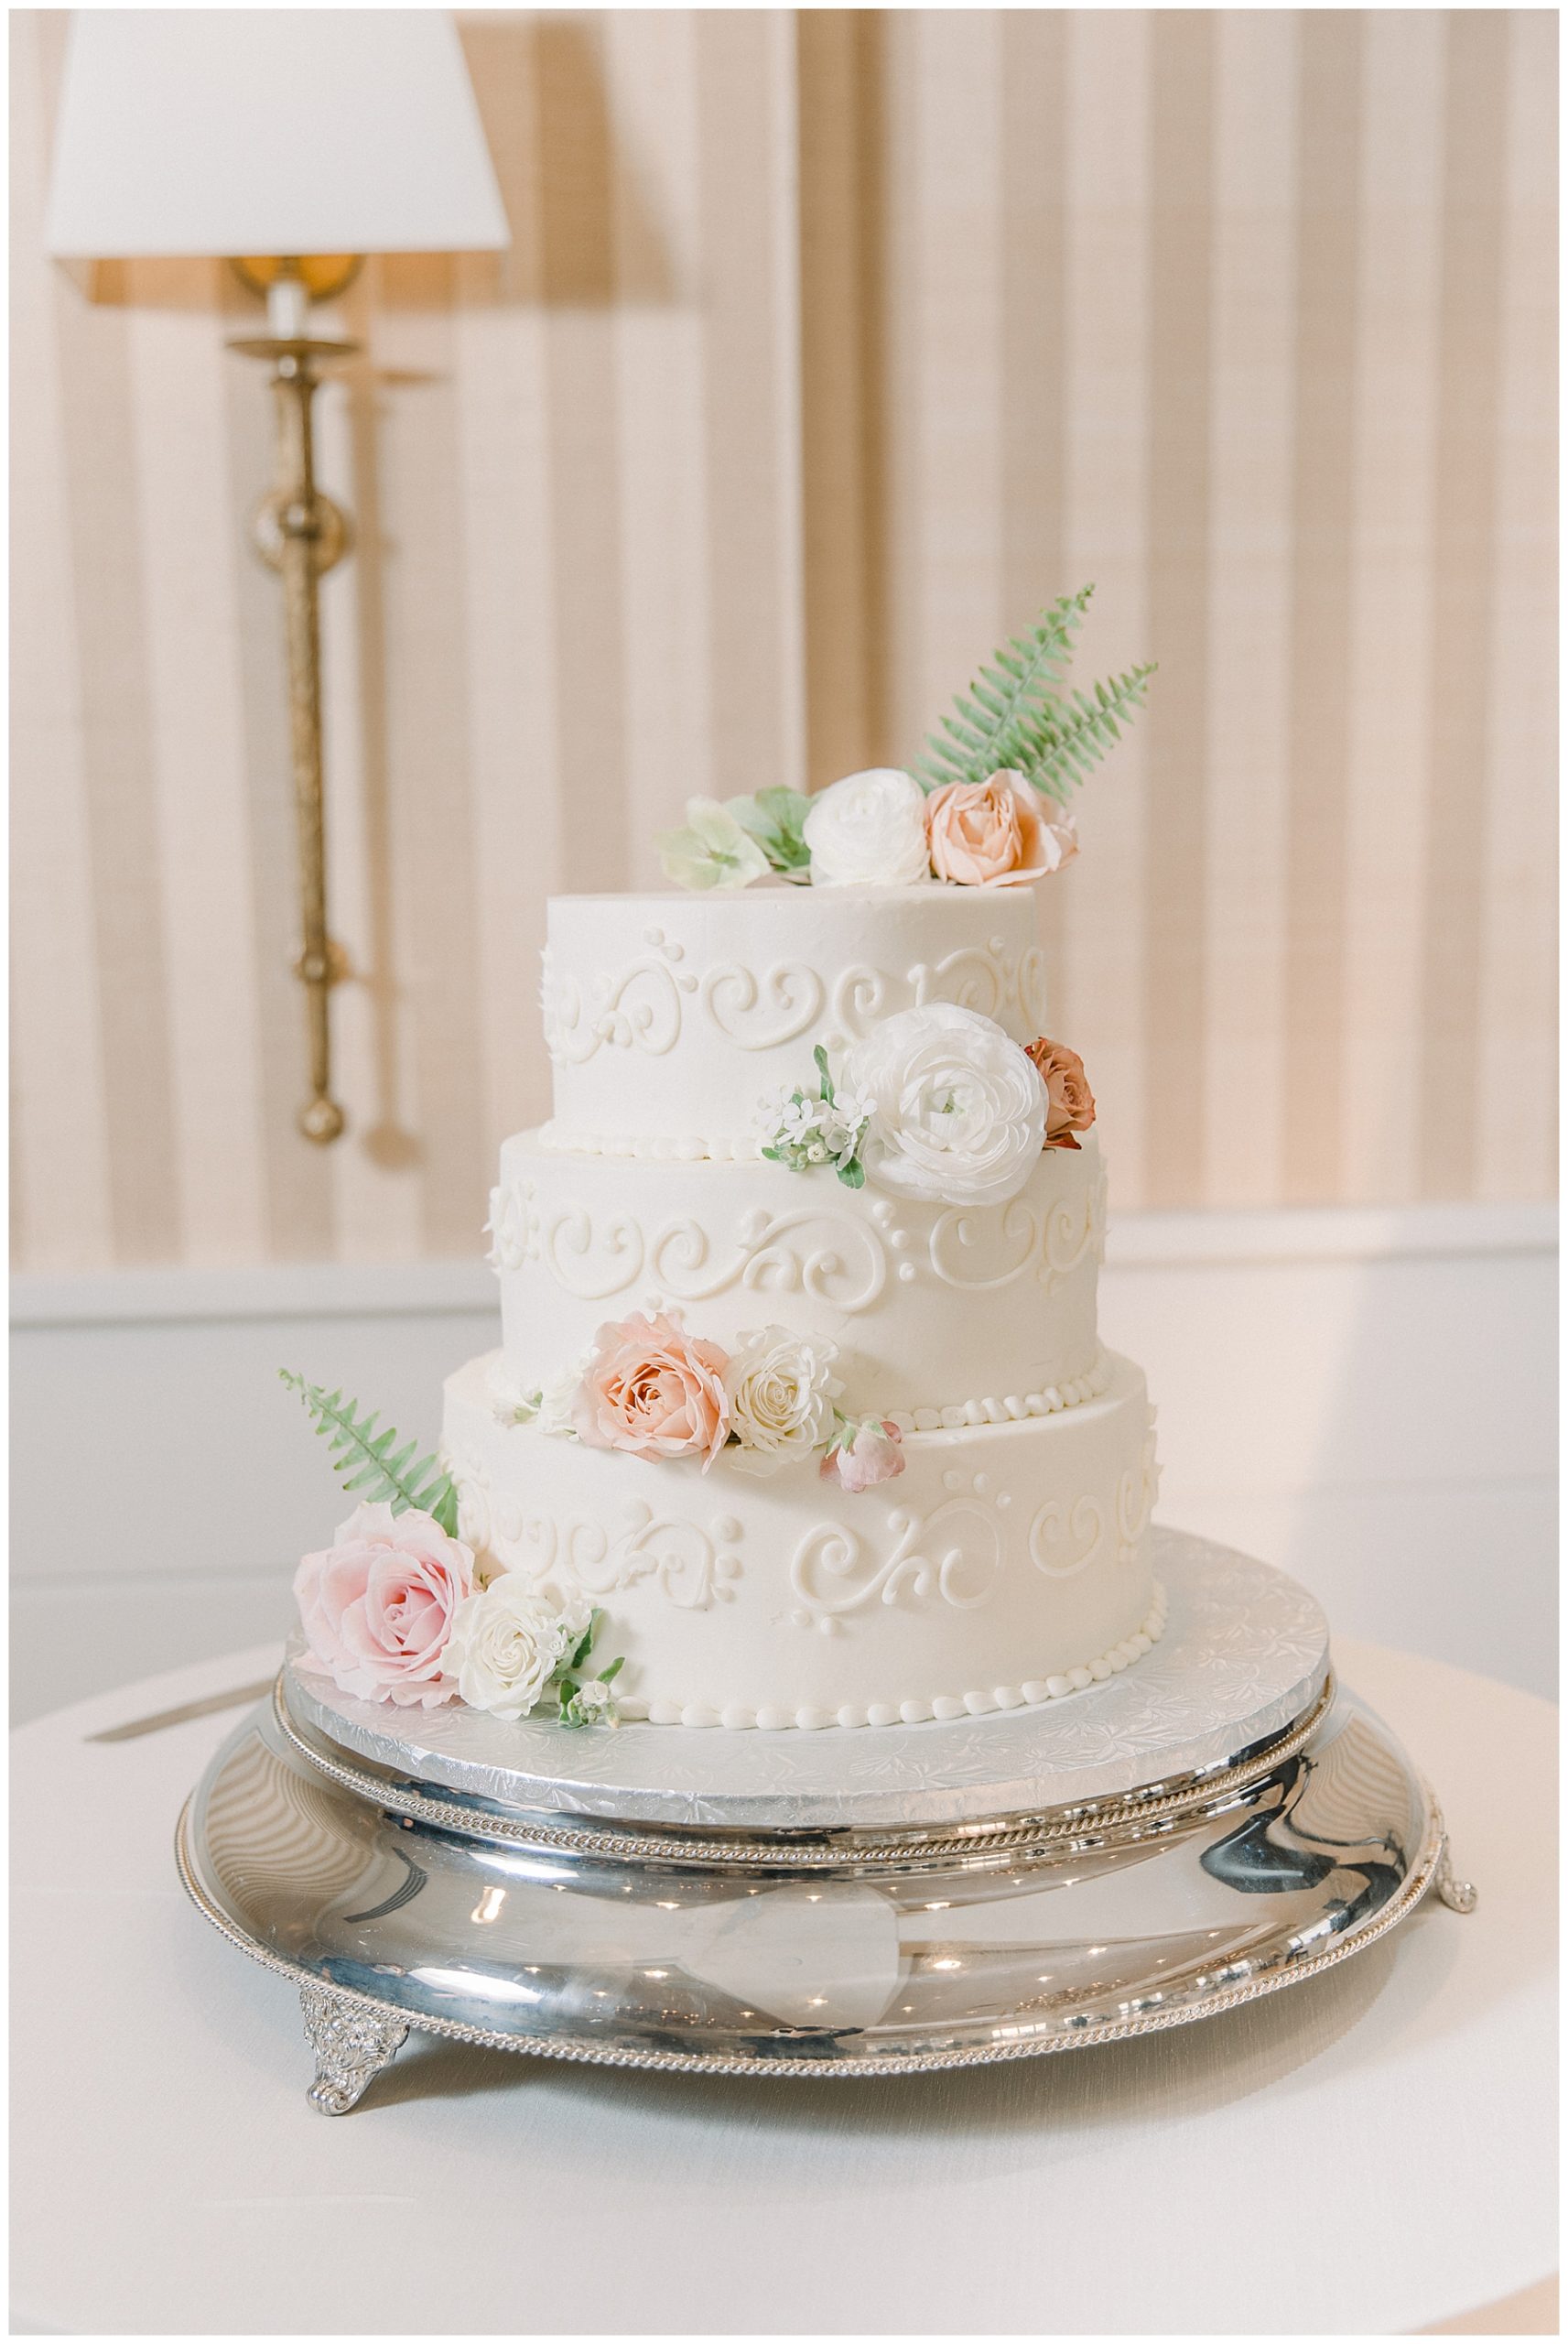 wedding Cake at Beauport Hotel Gloucester MA Wedding captured by Chelsea Morton Photography